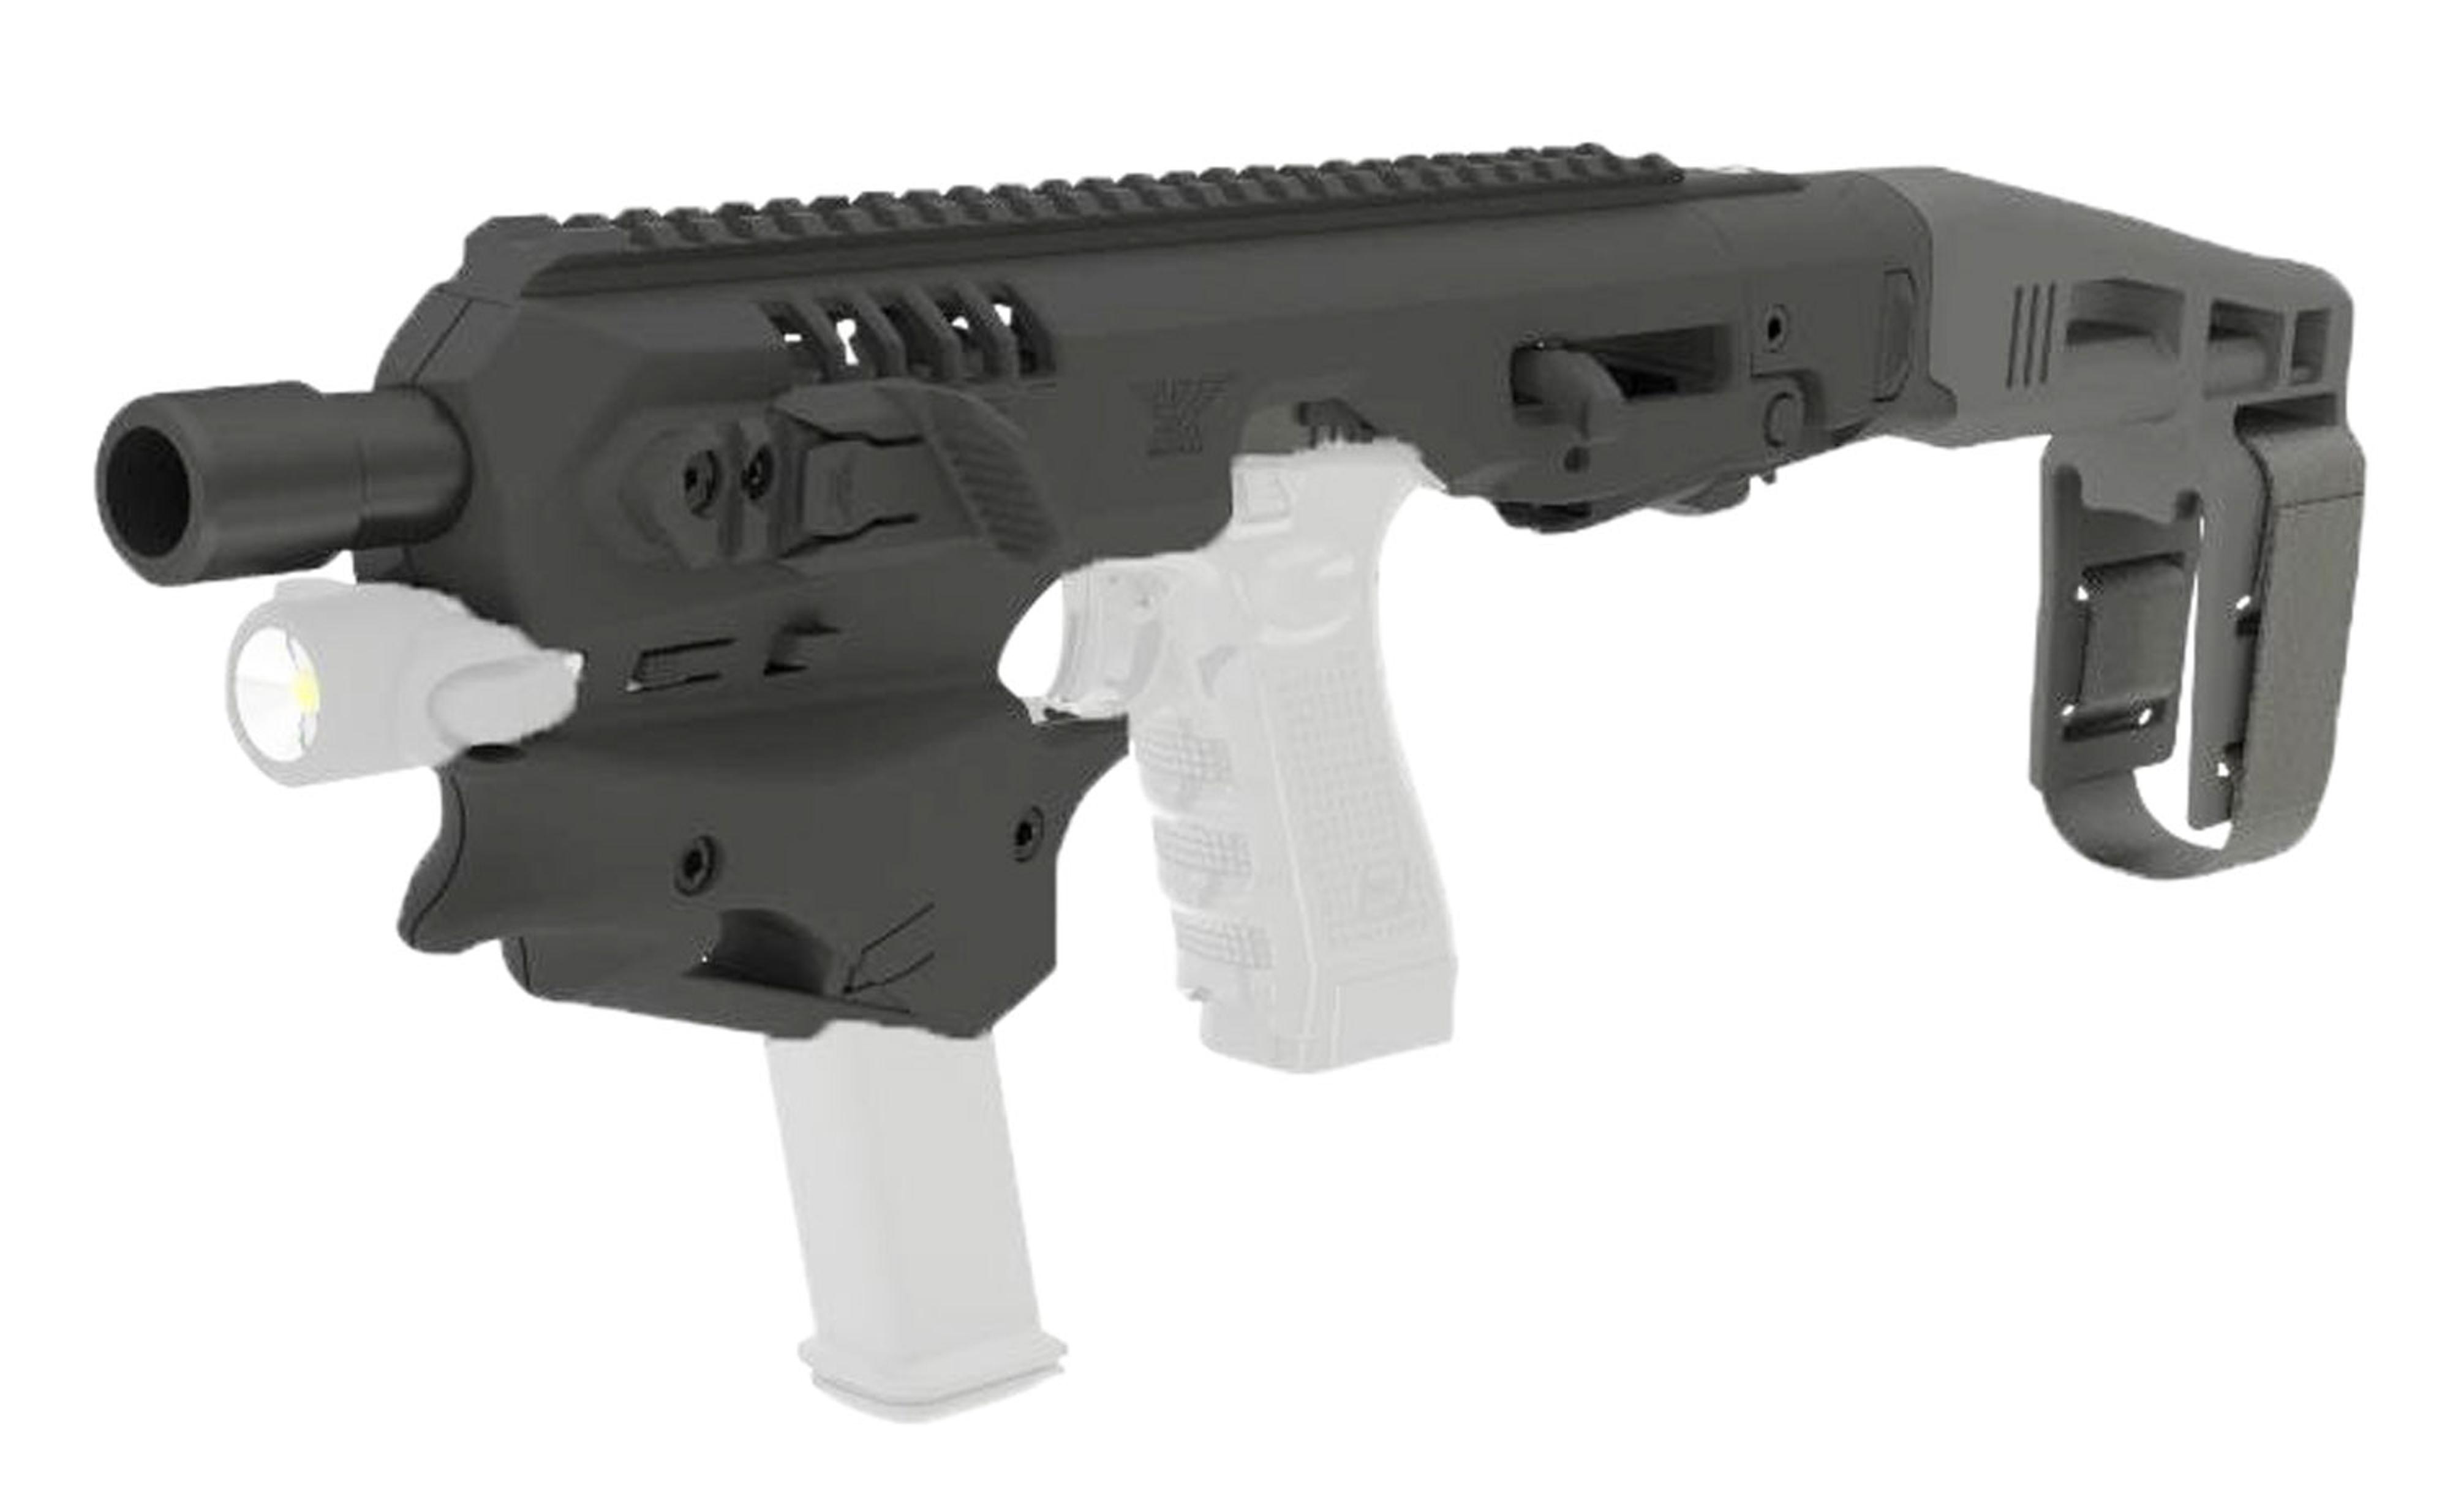 COMMAND ARMS ACCESSORIES - CAA MCK MICRO CONVERSION KIT FOR GLOCK